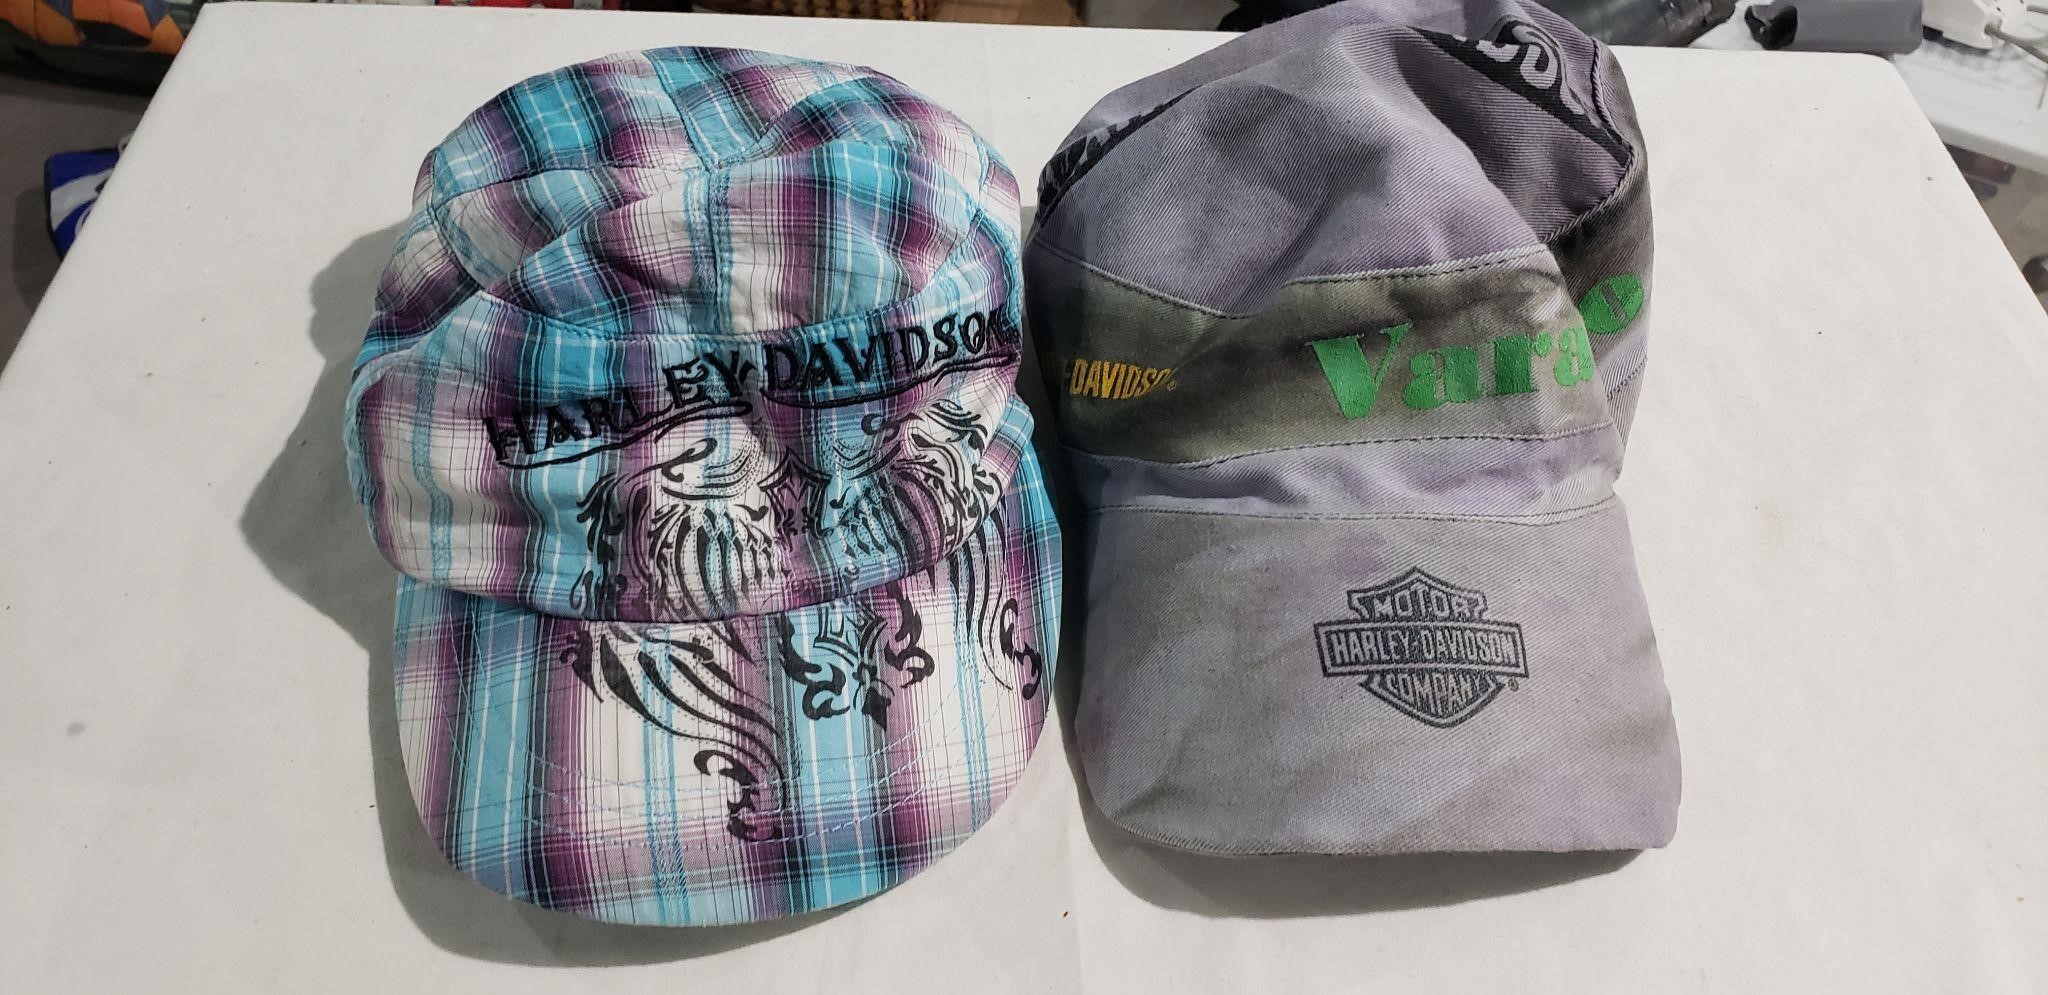 His and Hers Harley Davidson Hats